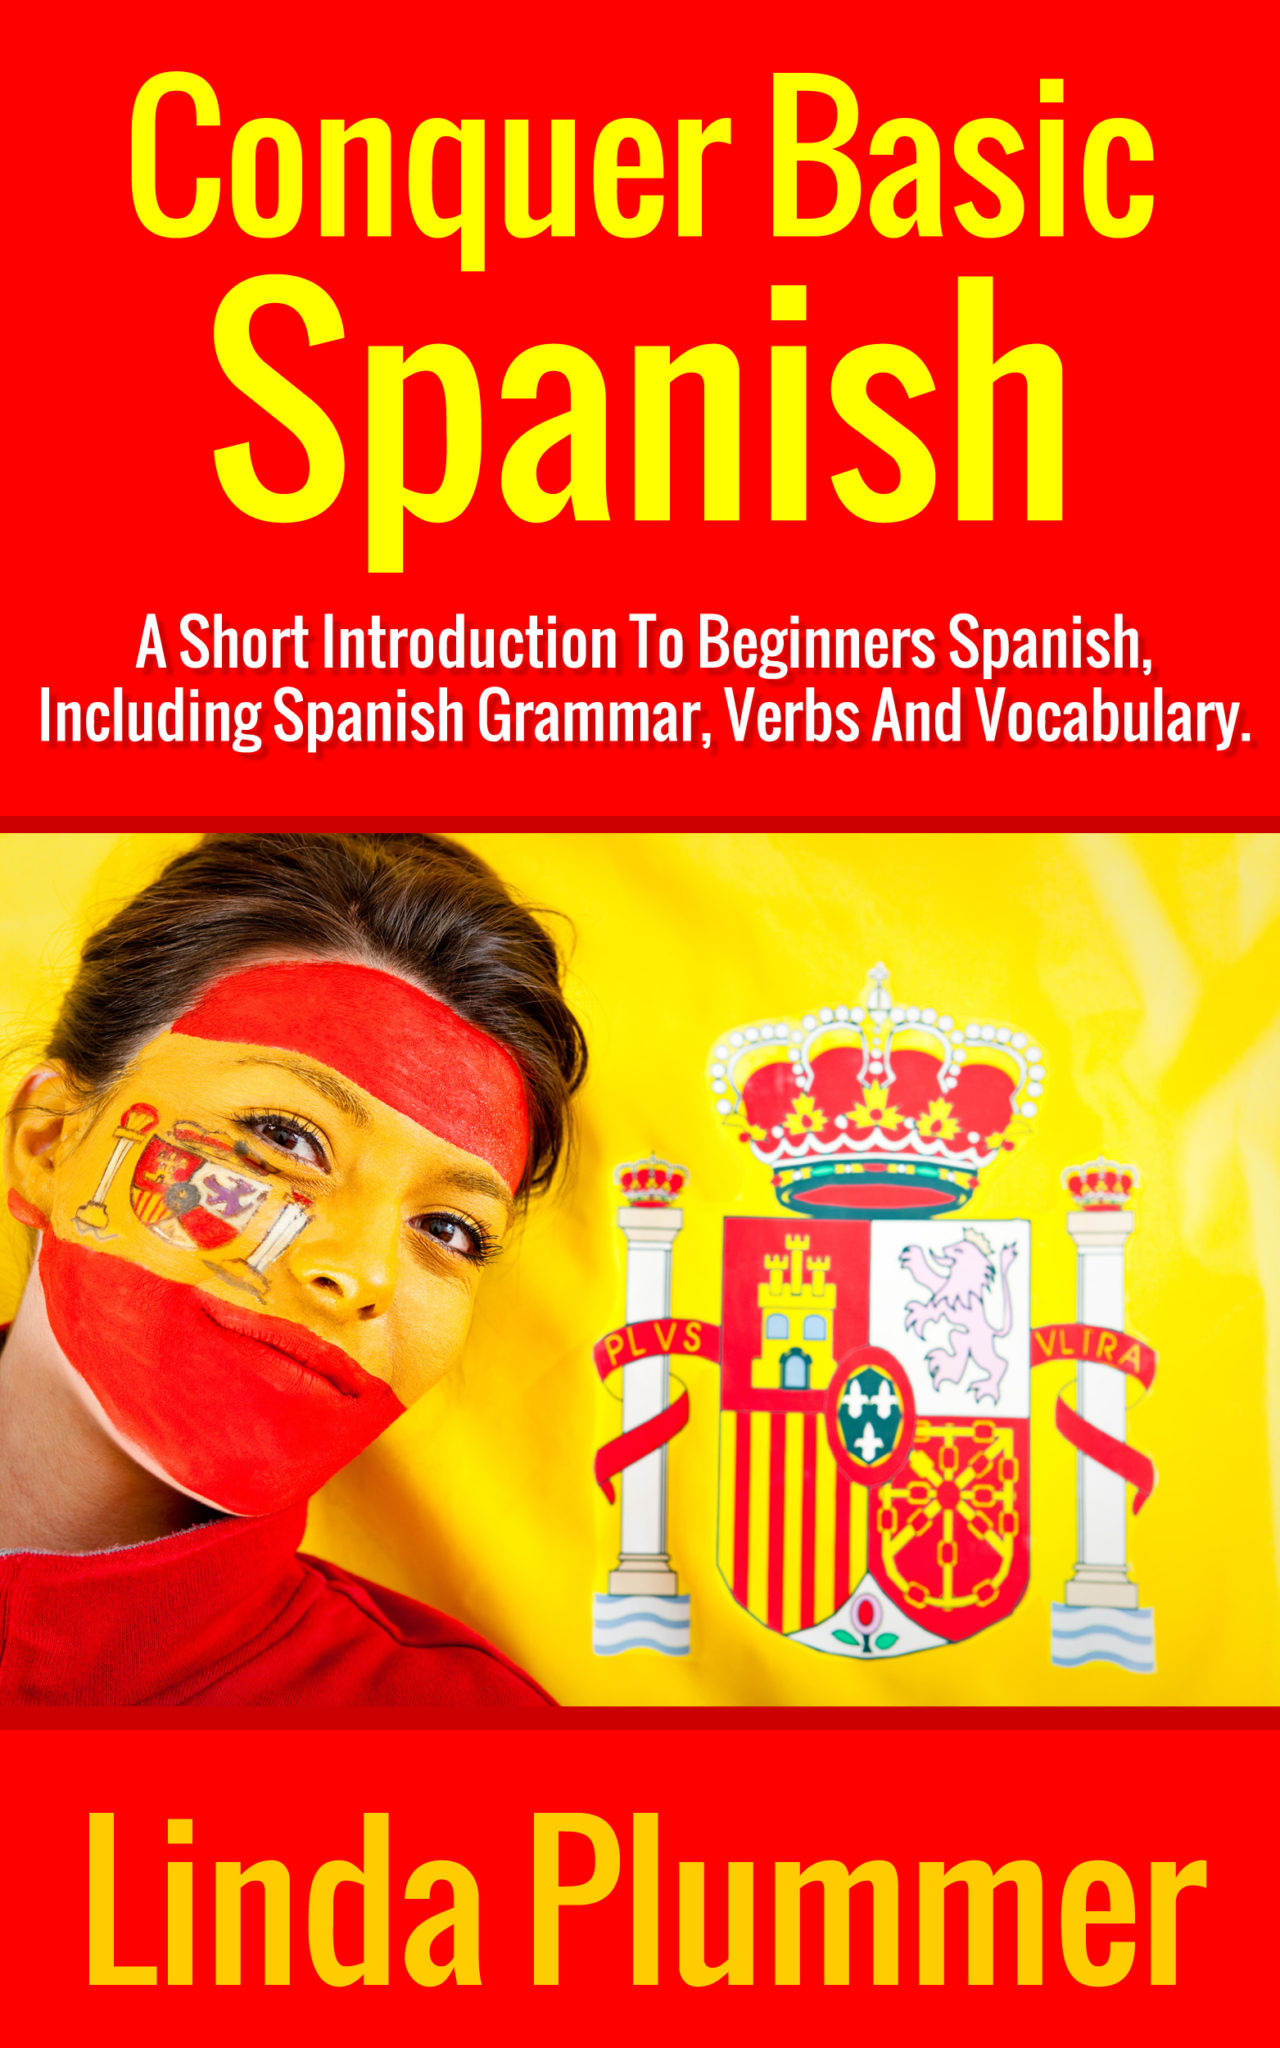 FREE: Conquer Basic Spanish by Linda Plummer